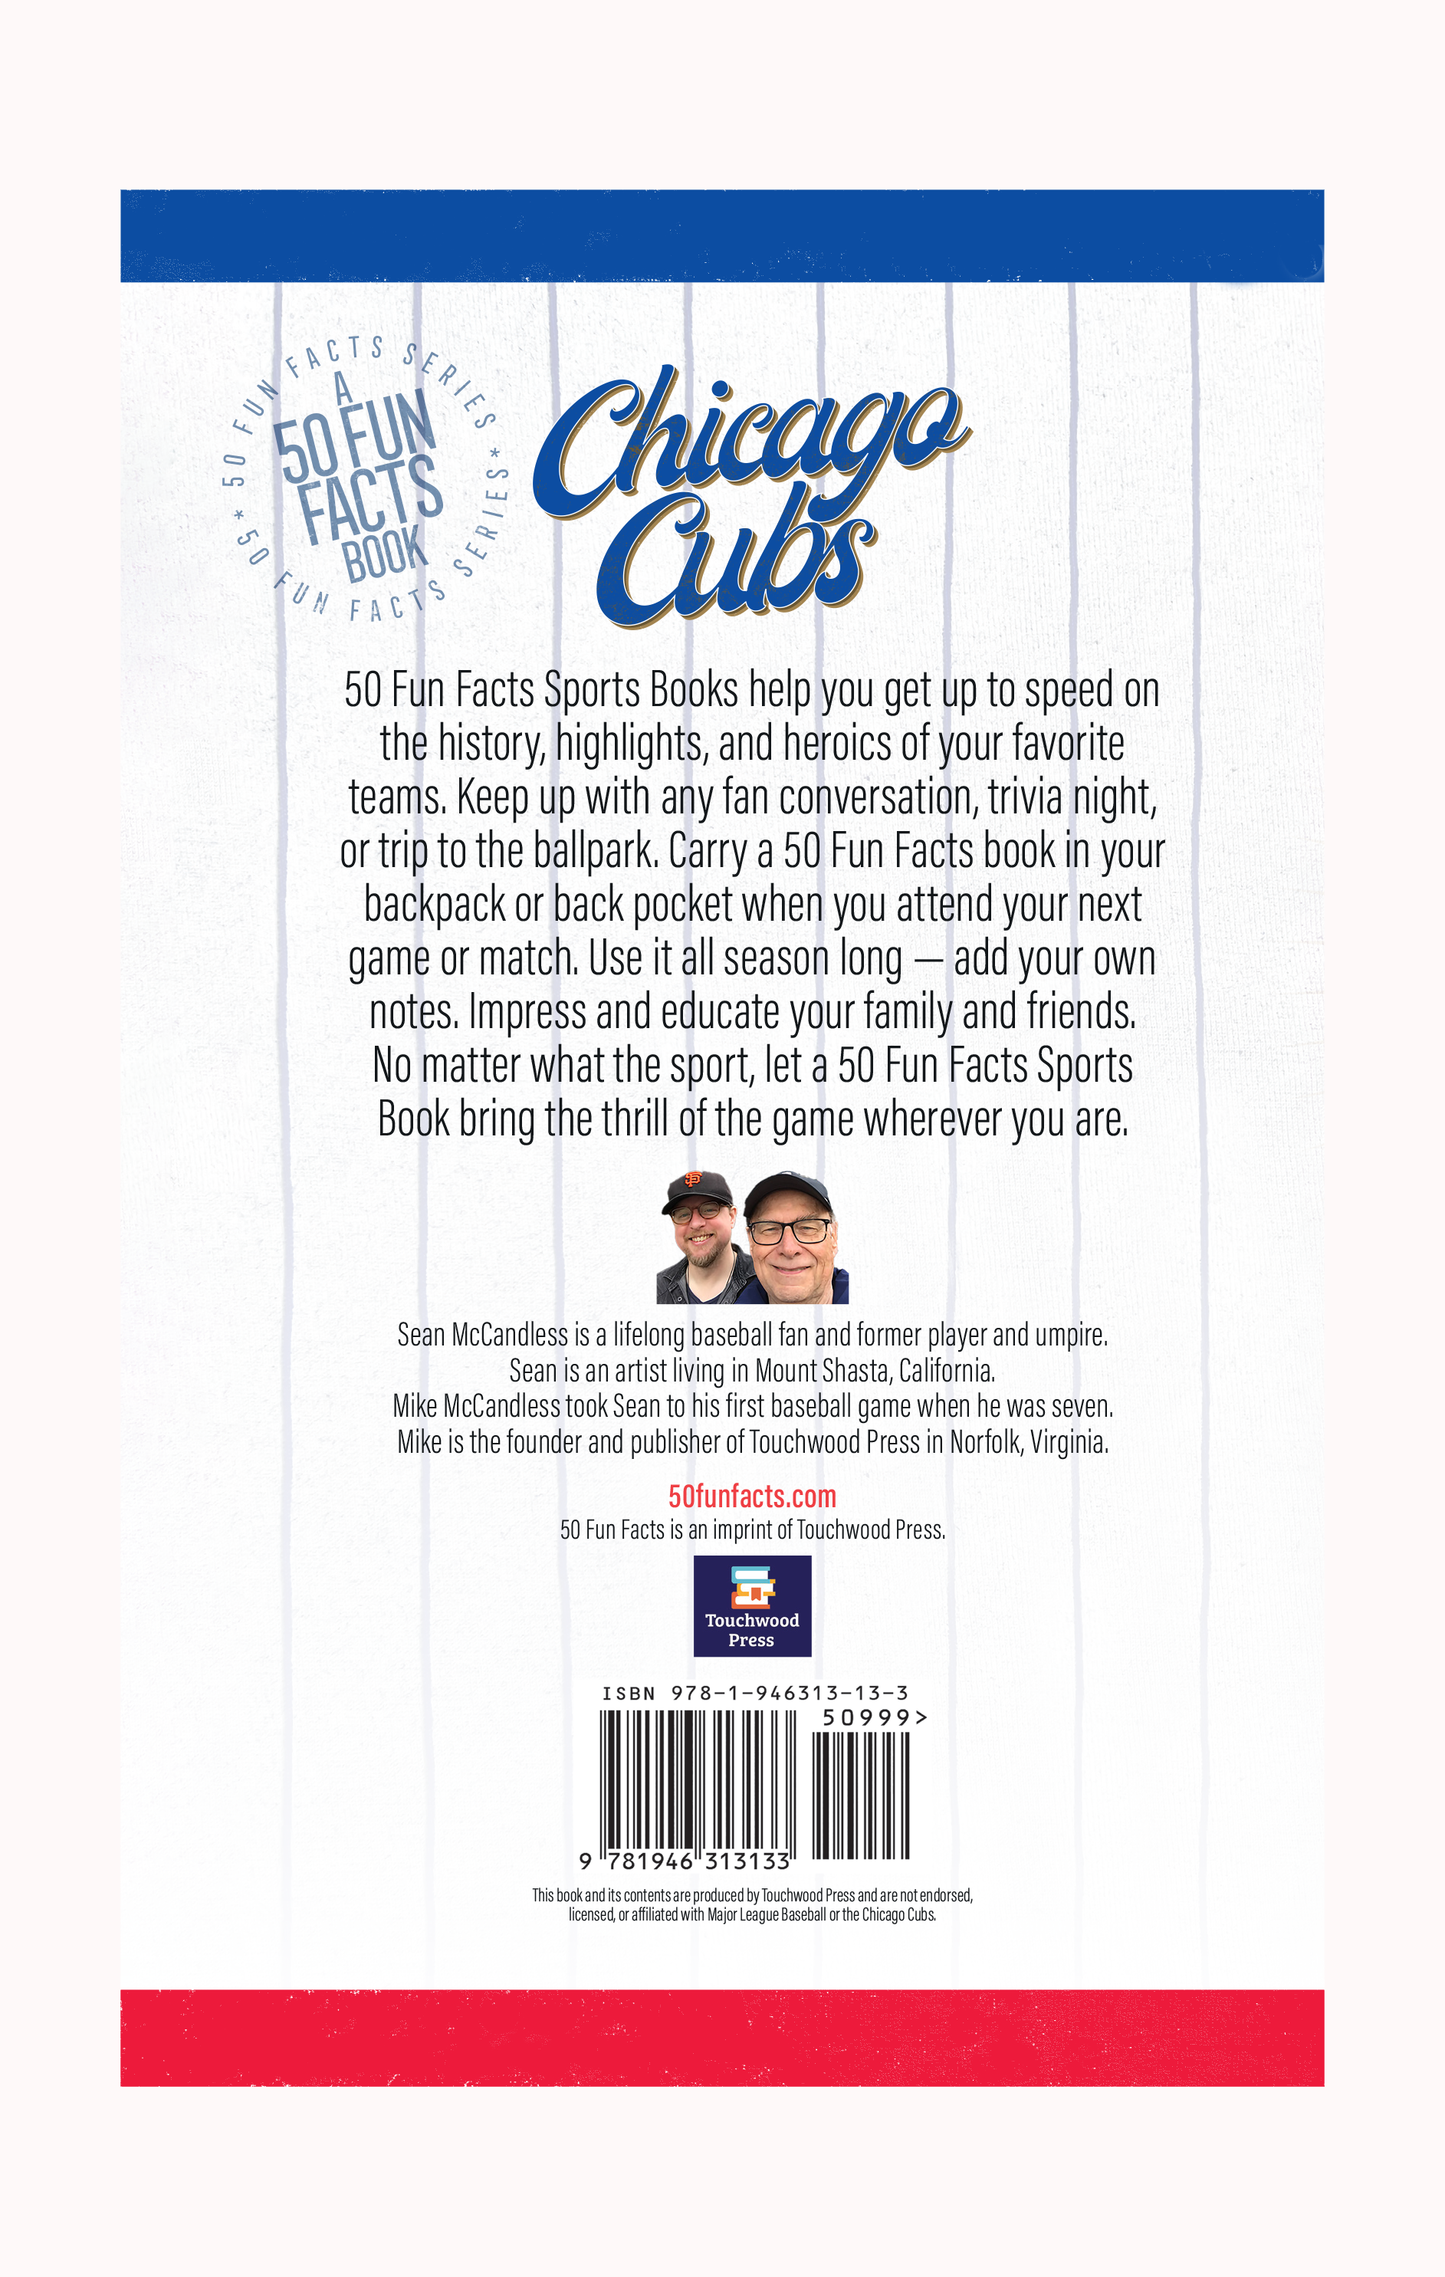 50 Fun Facts About the Chicago Cubs-Digital Download Edition